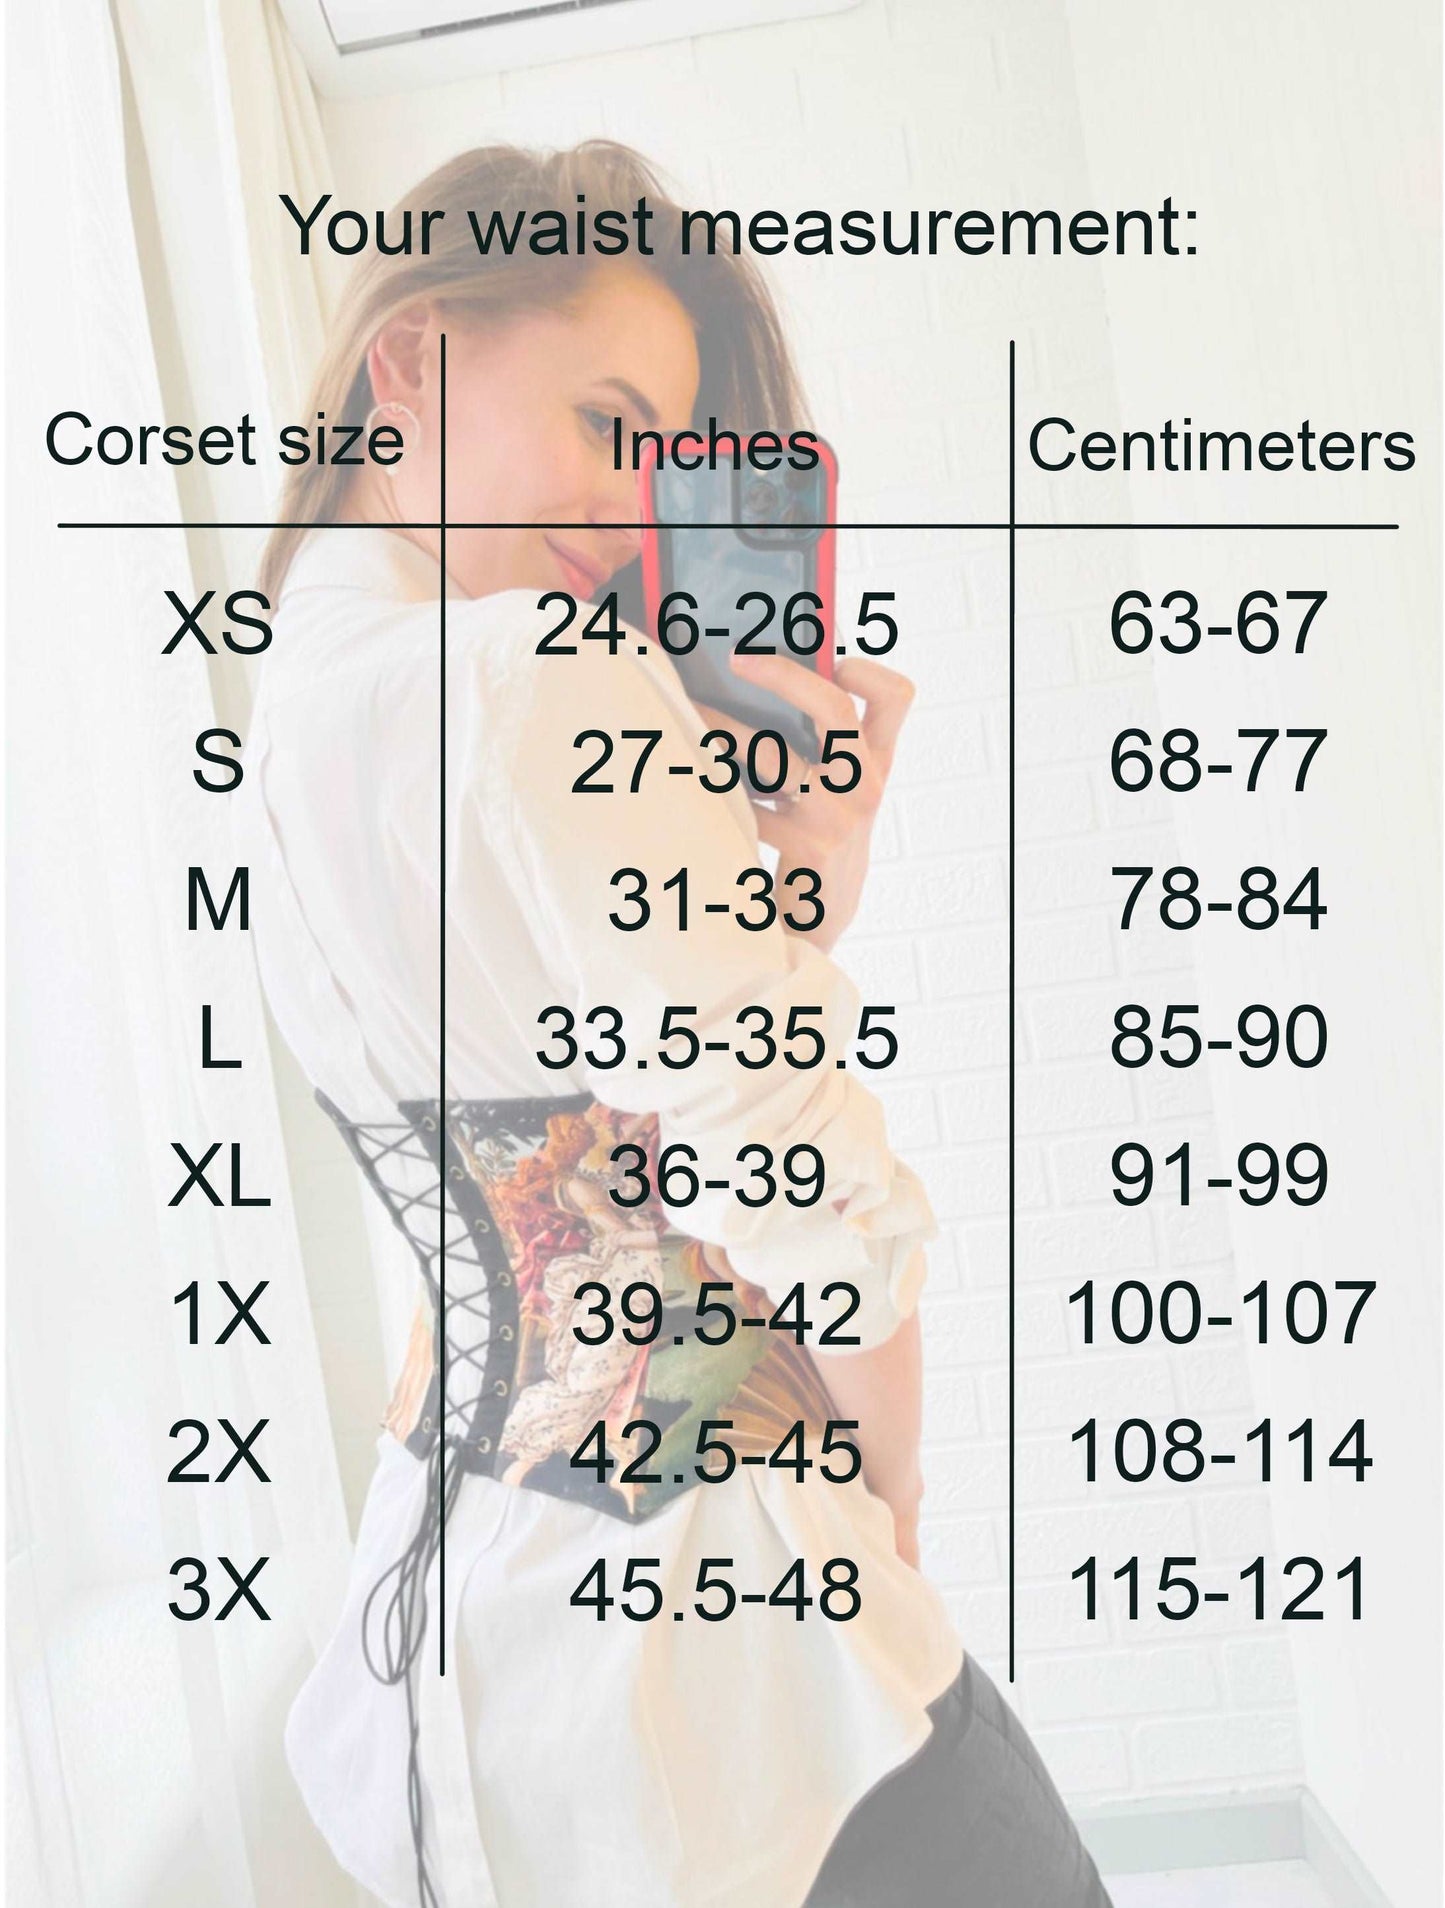 Size chart for corsets size and waist measurement